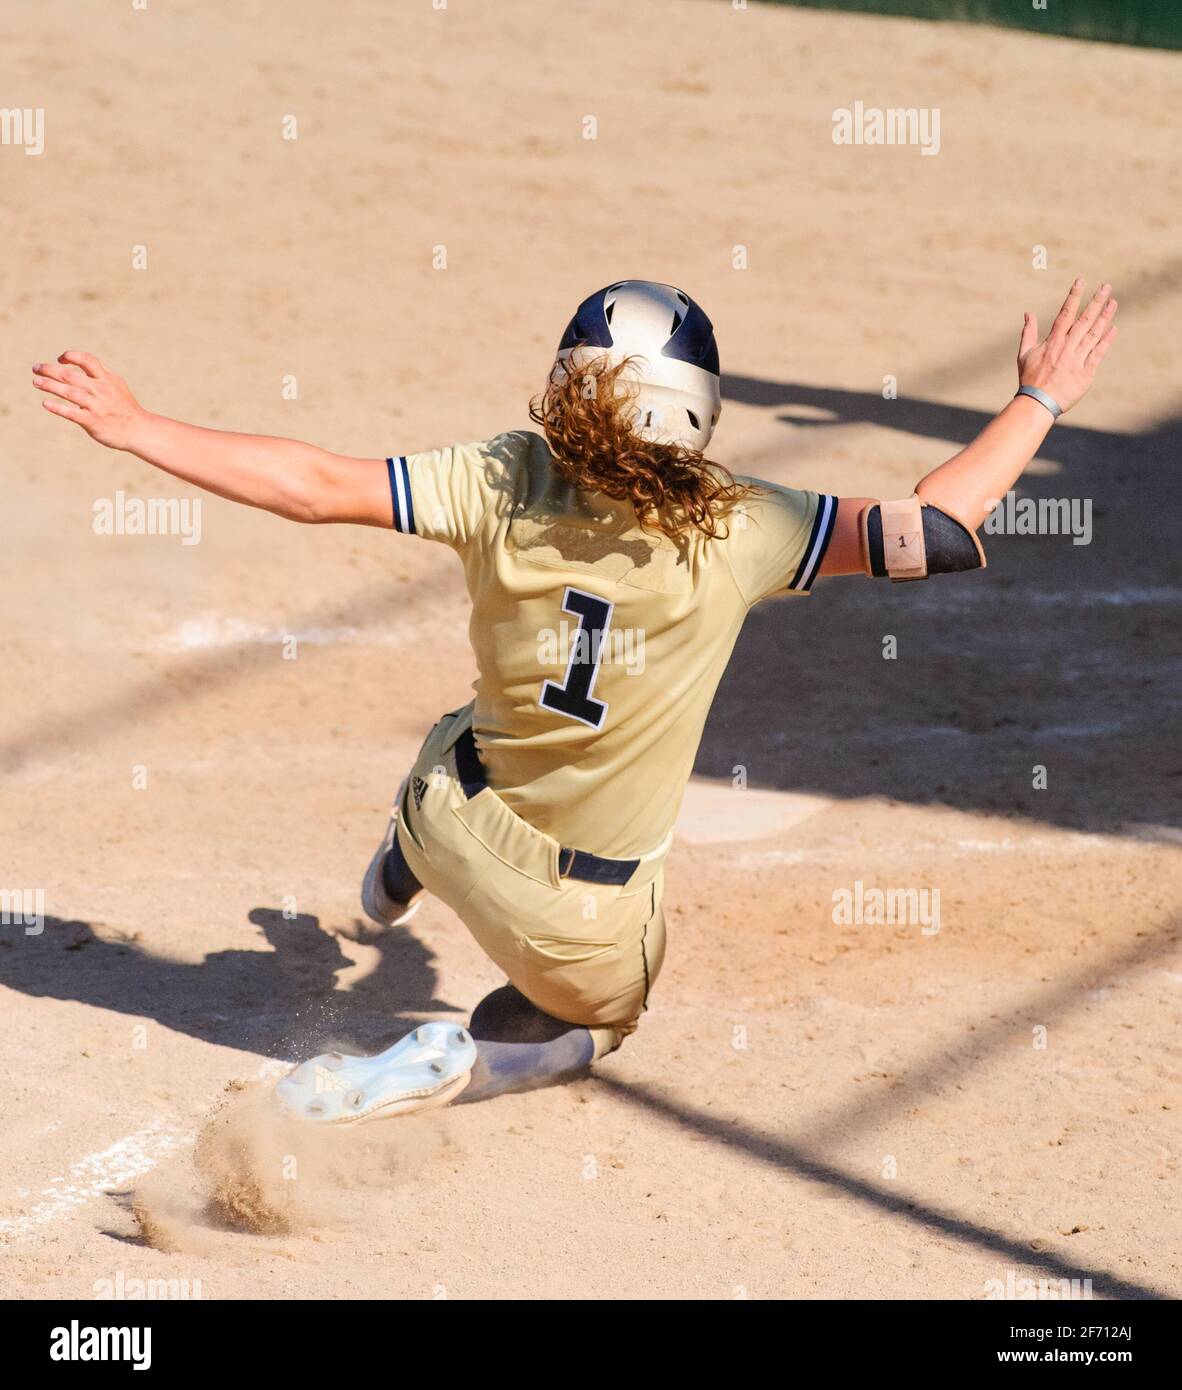 A Female Baseball Player Is Sliding Into Home Plate In Vertical Image Format Stock Photo